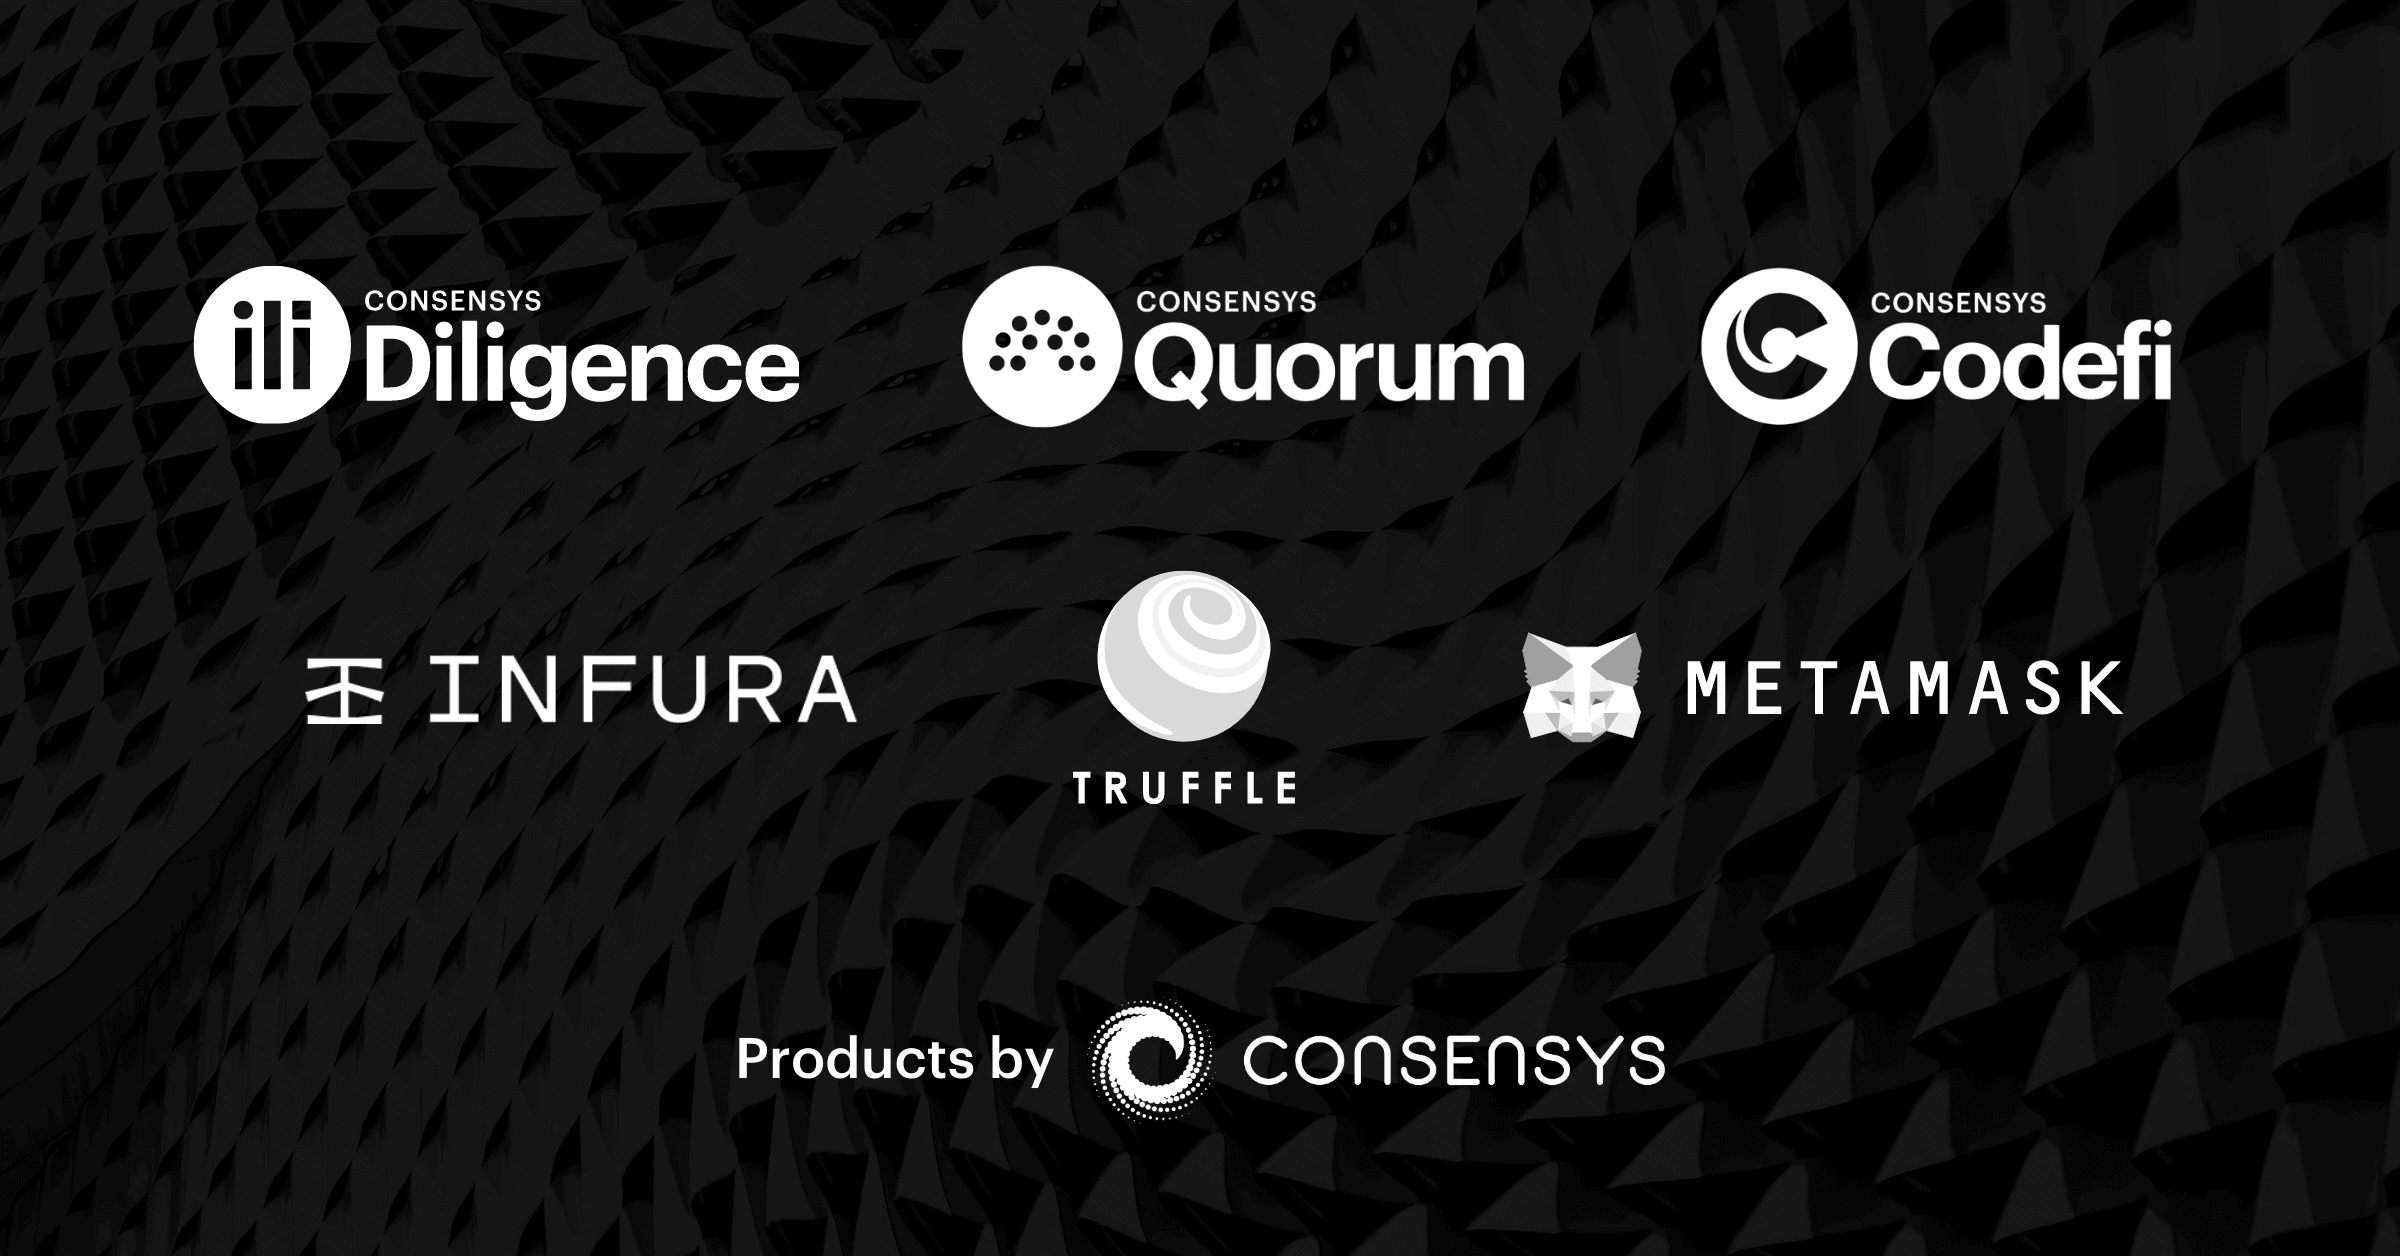 ConsenSys acquires MyCrypto: Plans to team up with MetaMask